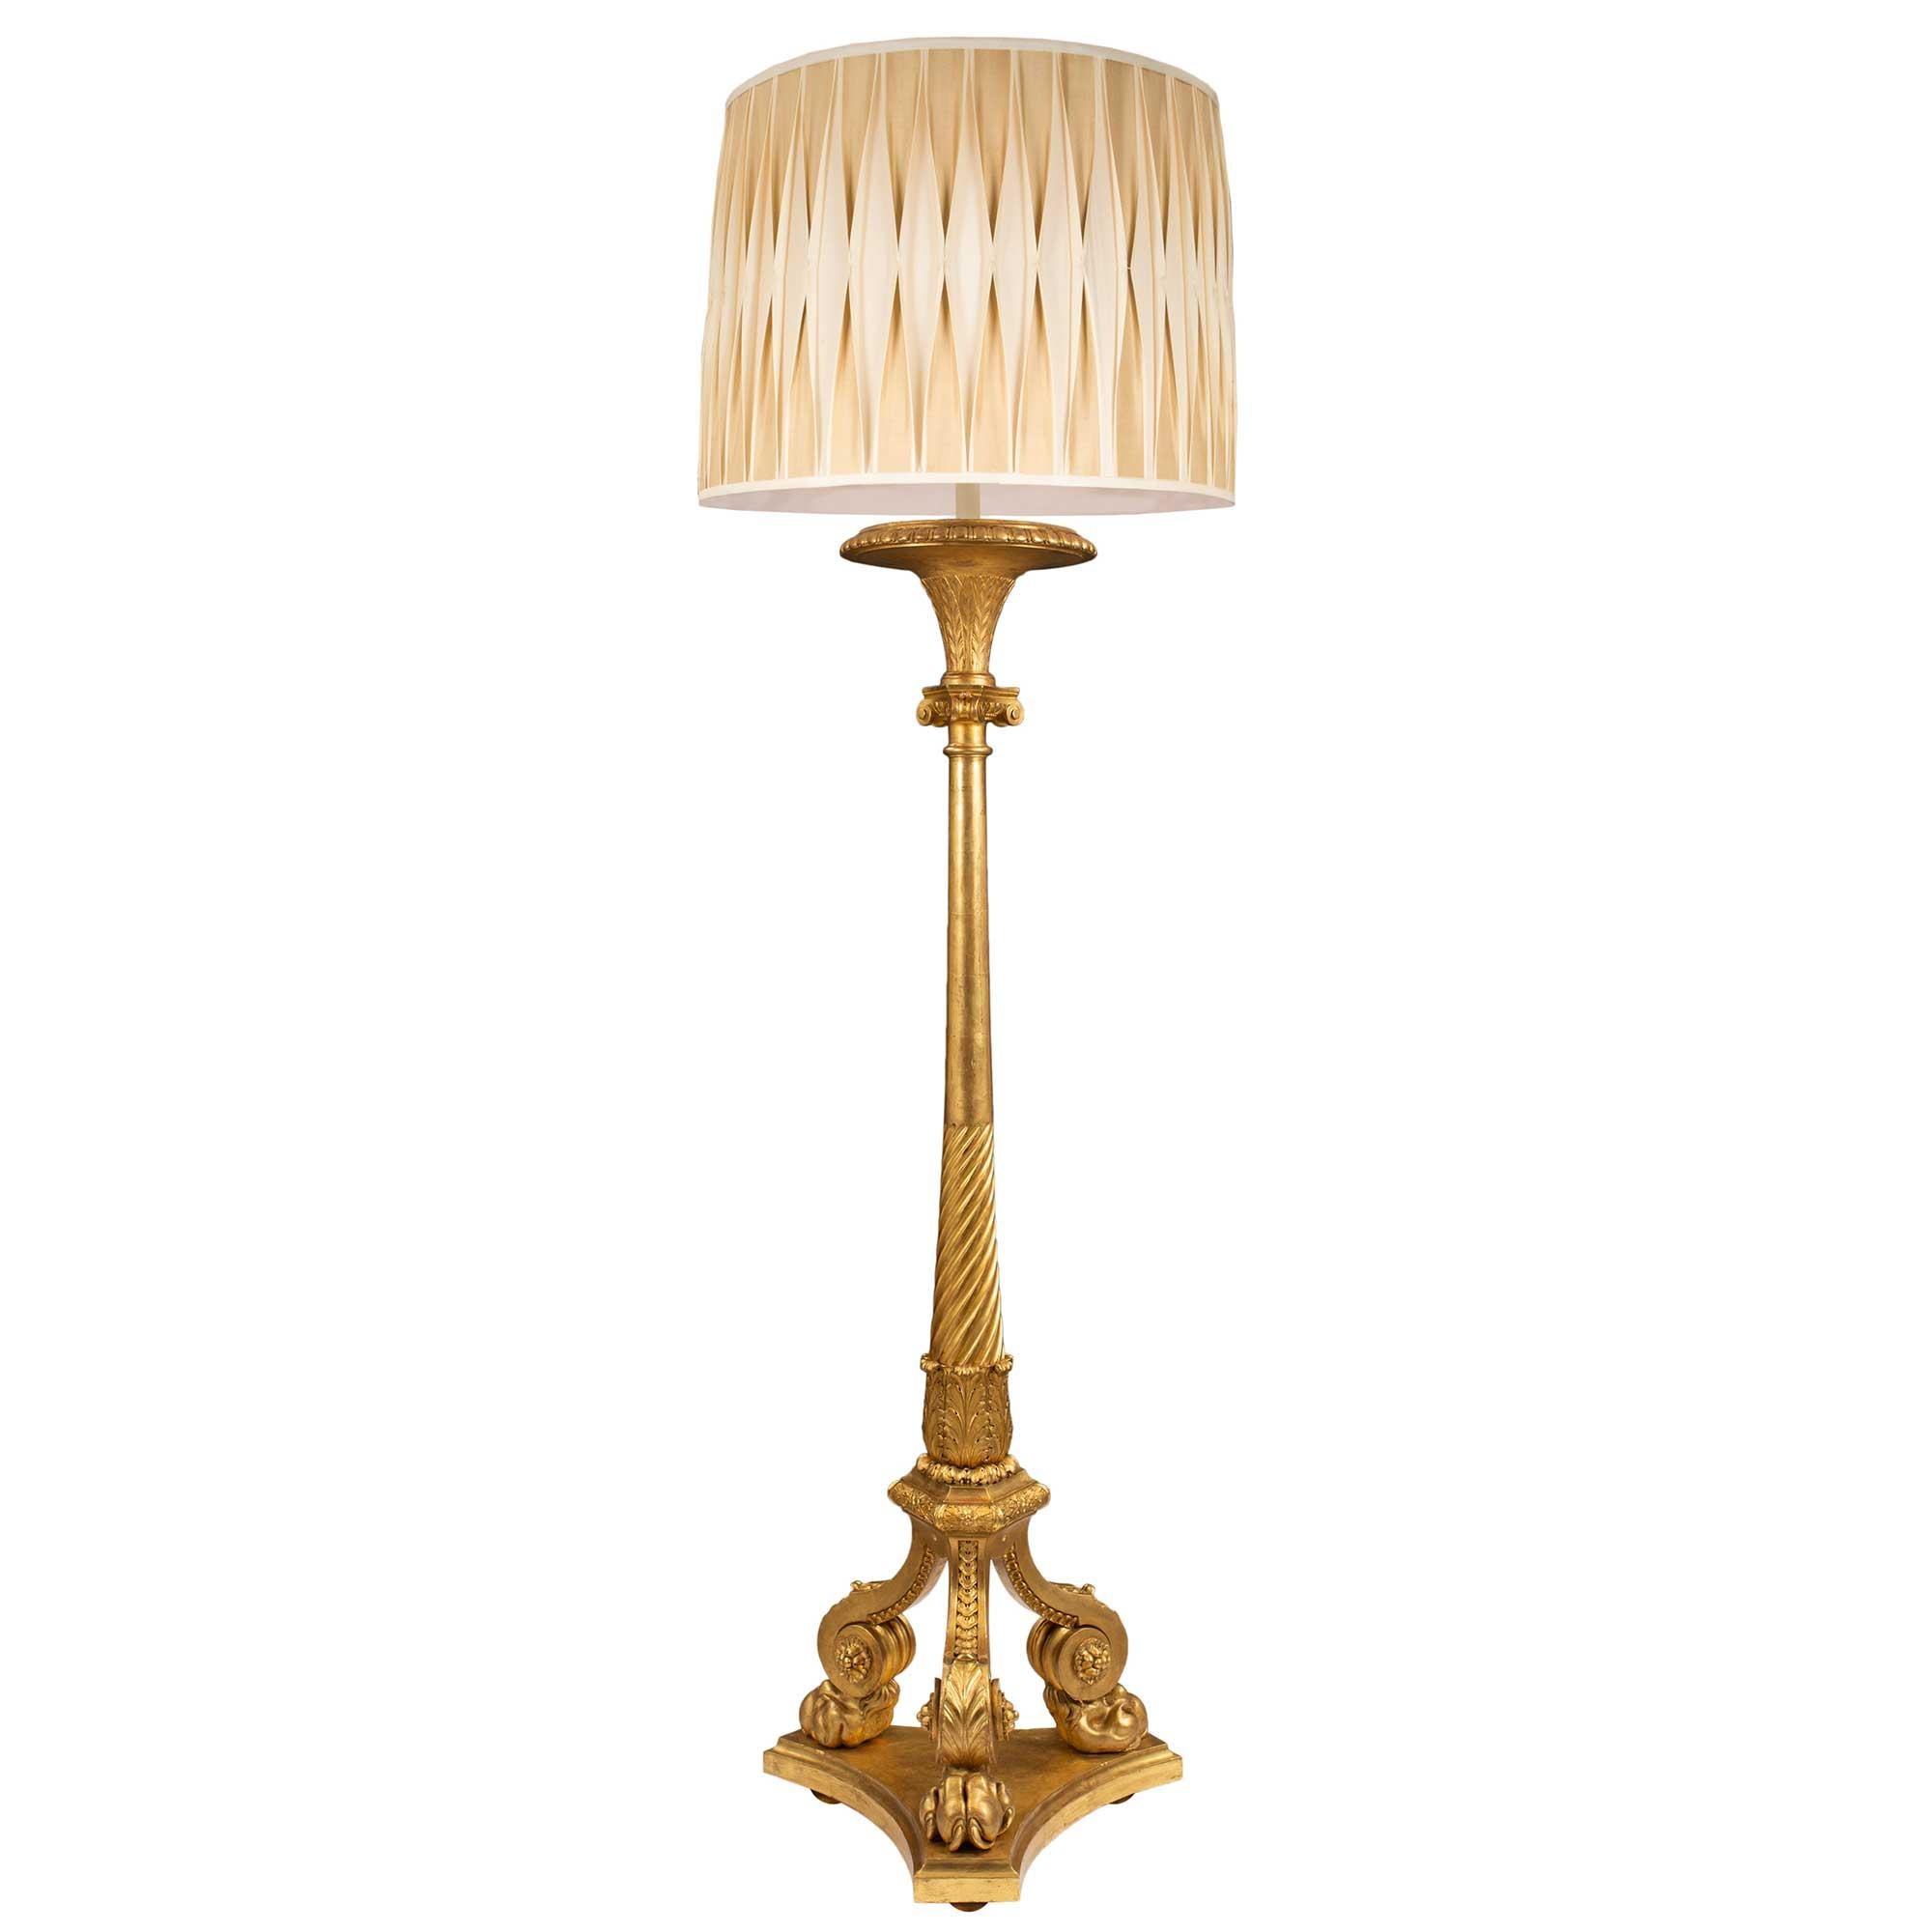 French Louis XVI St. Mid 19th Century Giltwood Floor Lamp For Sale